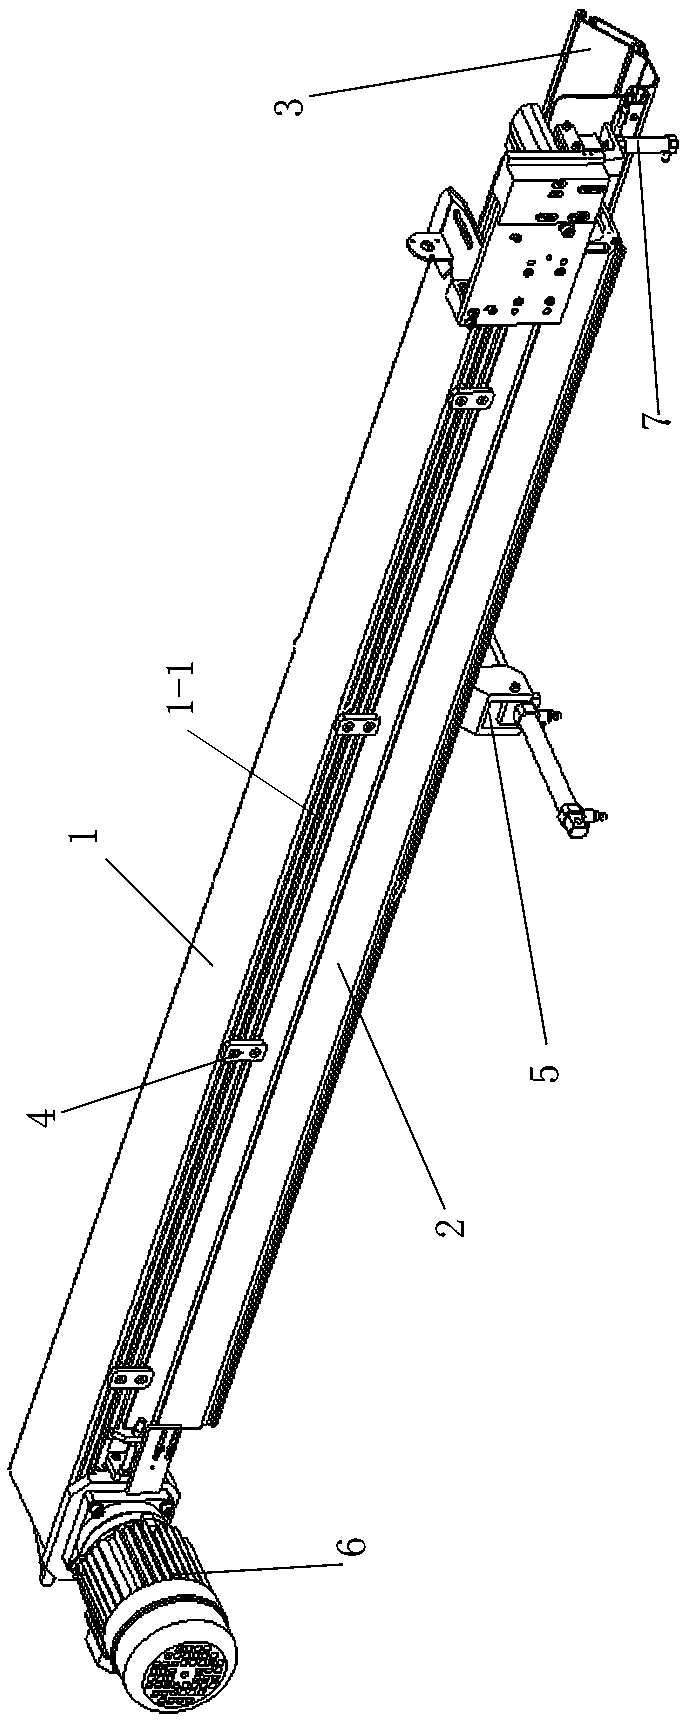 Cable collecting device